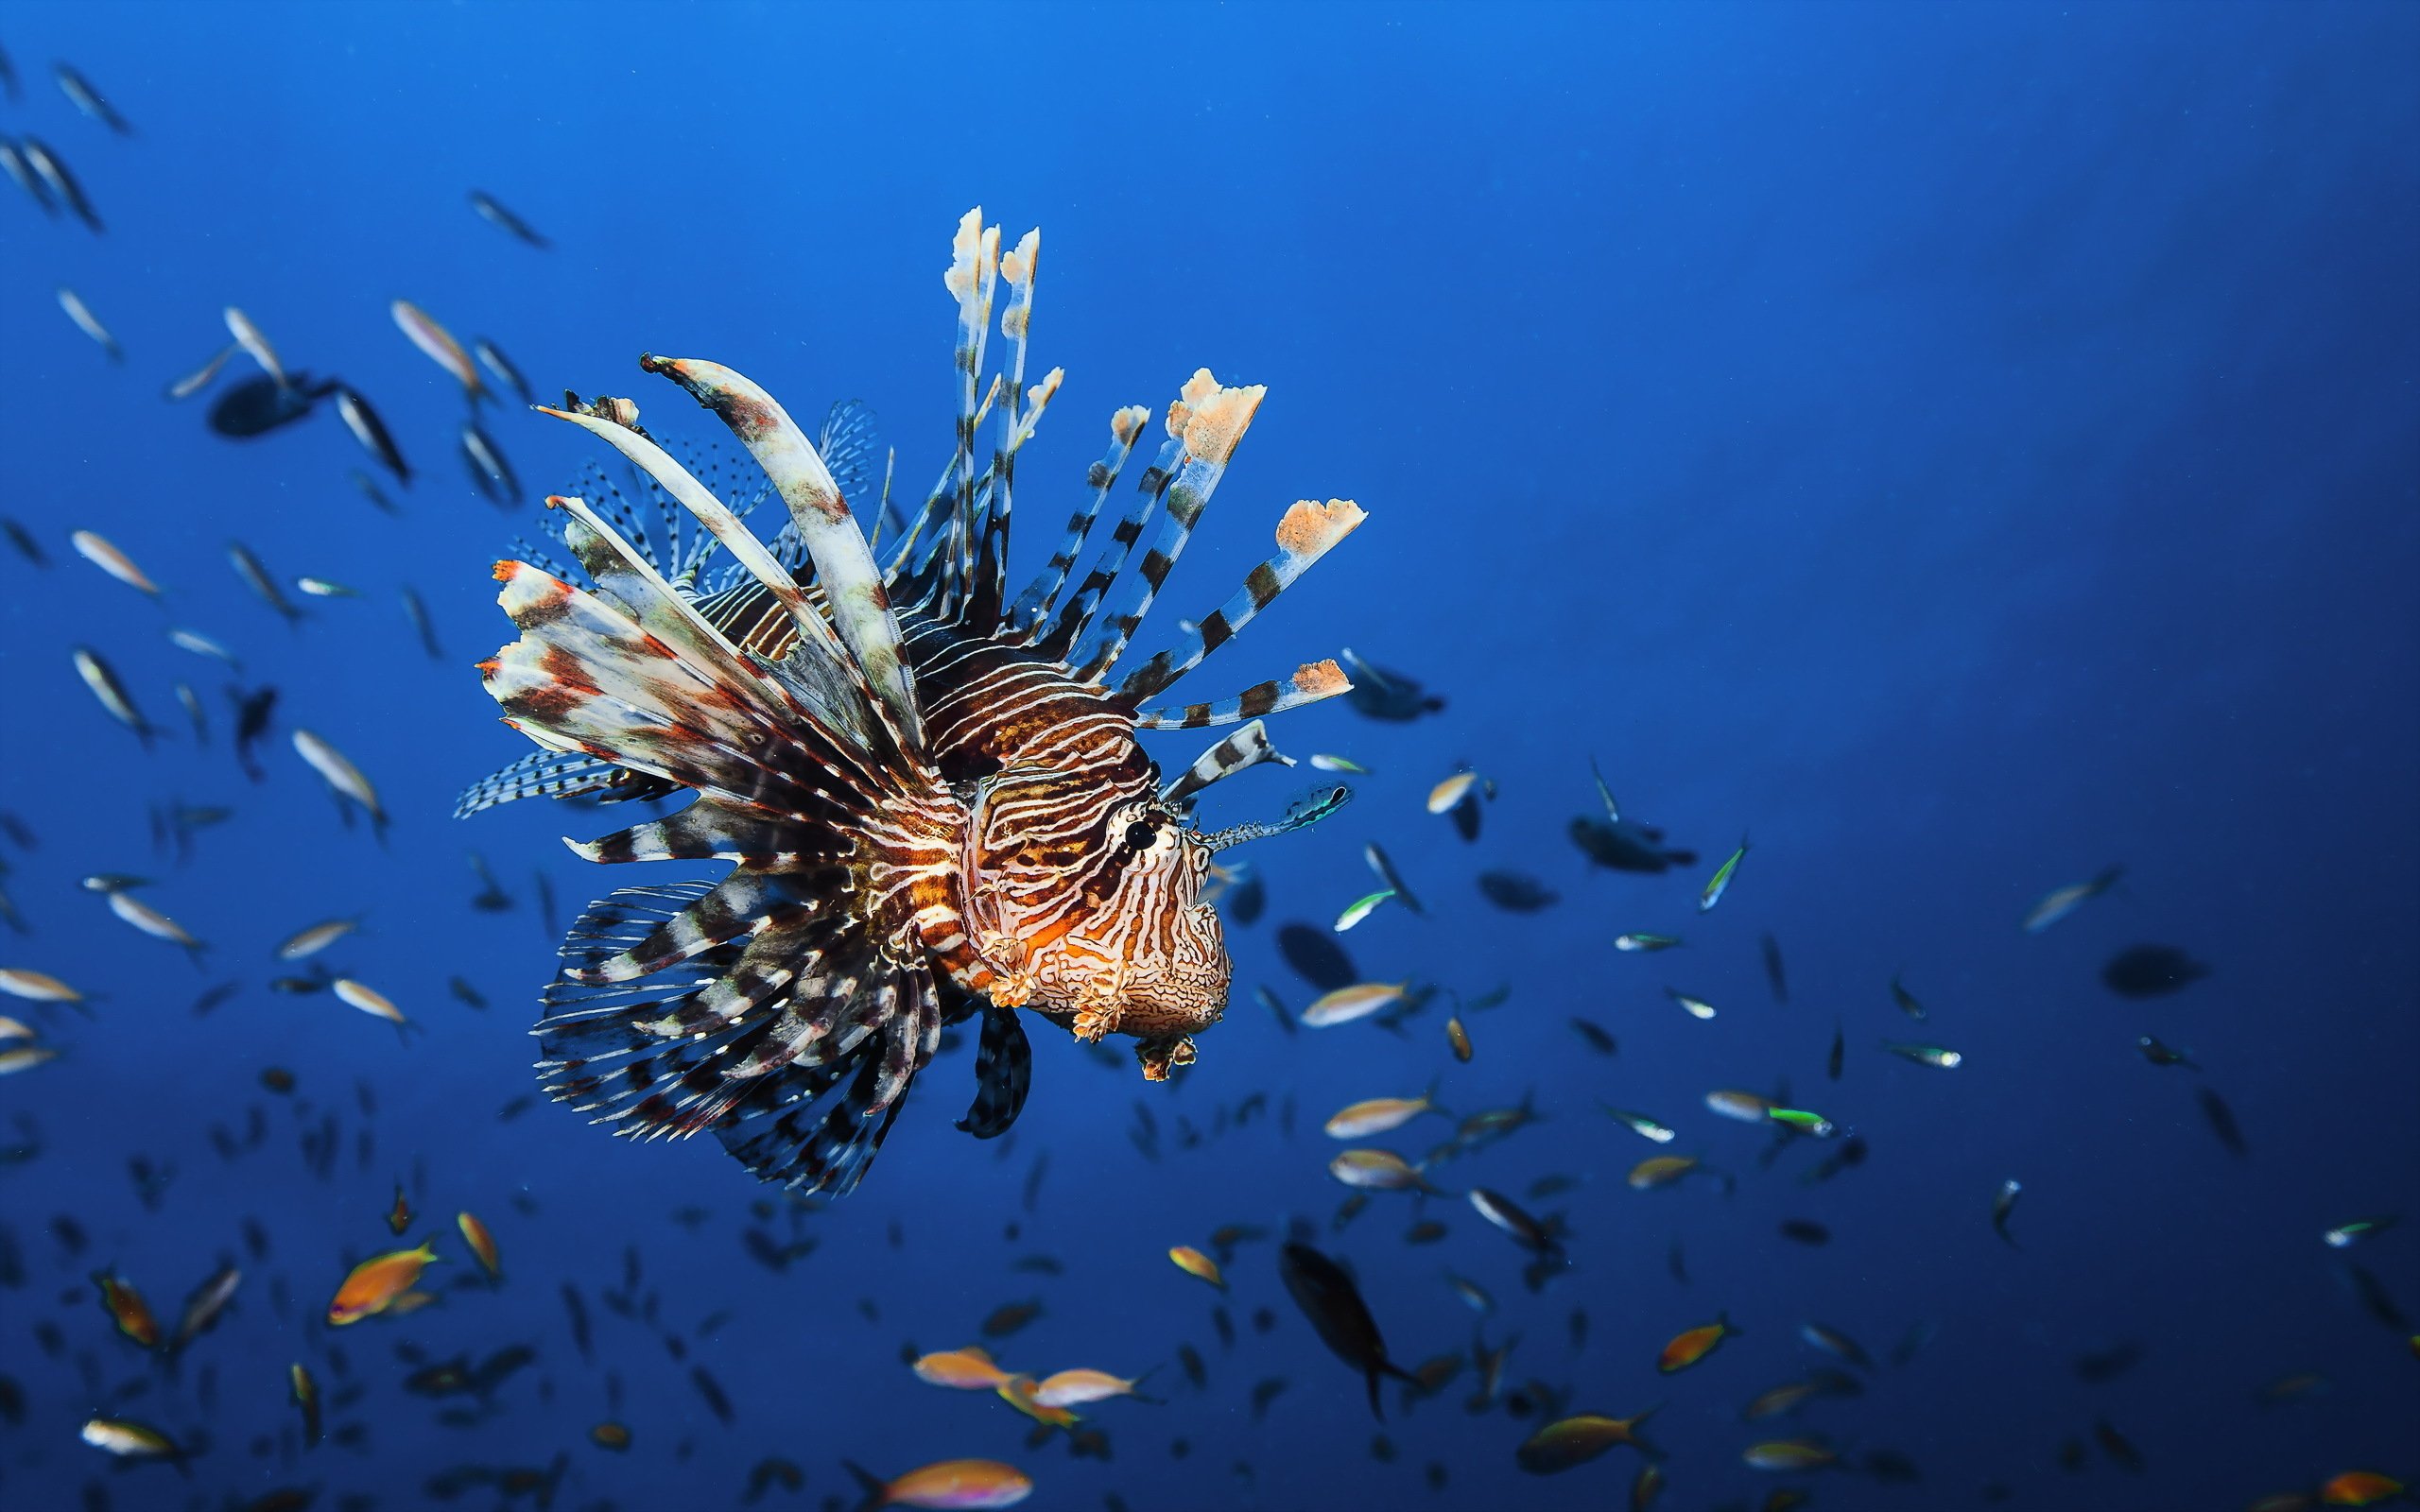 Gallery For Gt Lionfish Wallpaper